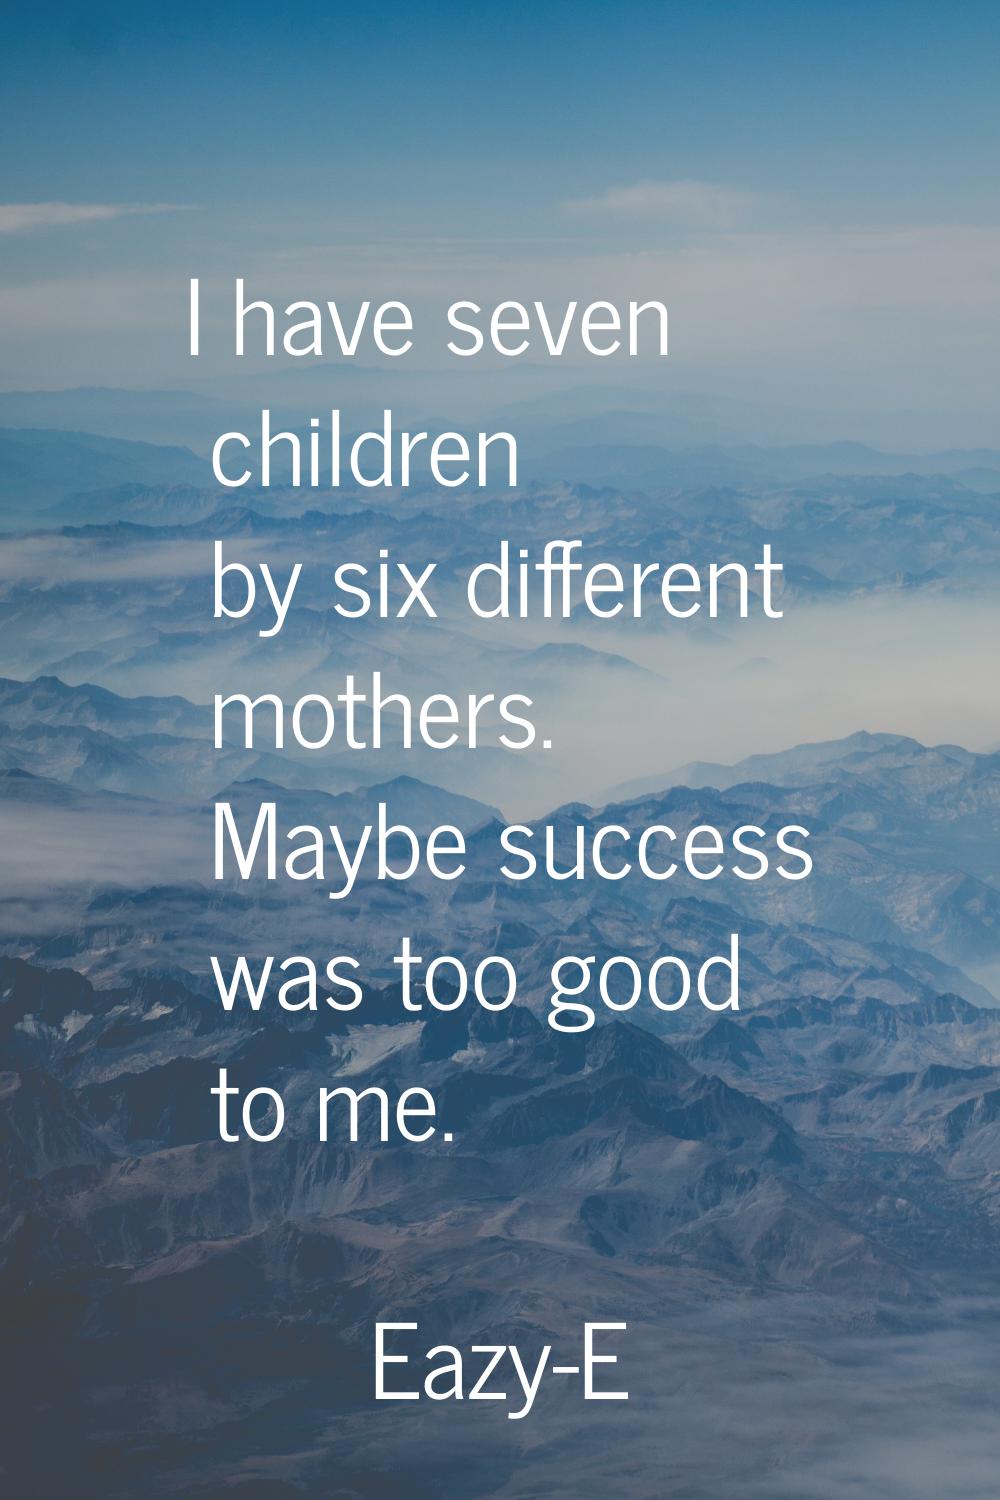 I have seven children by six different mothers. Maybe success was too good to me.